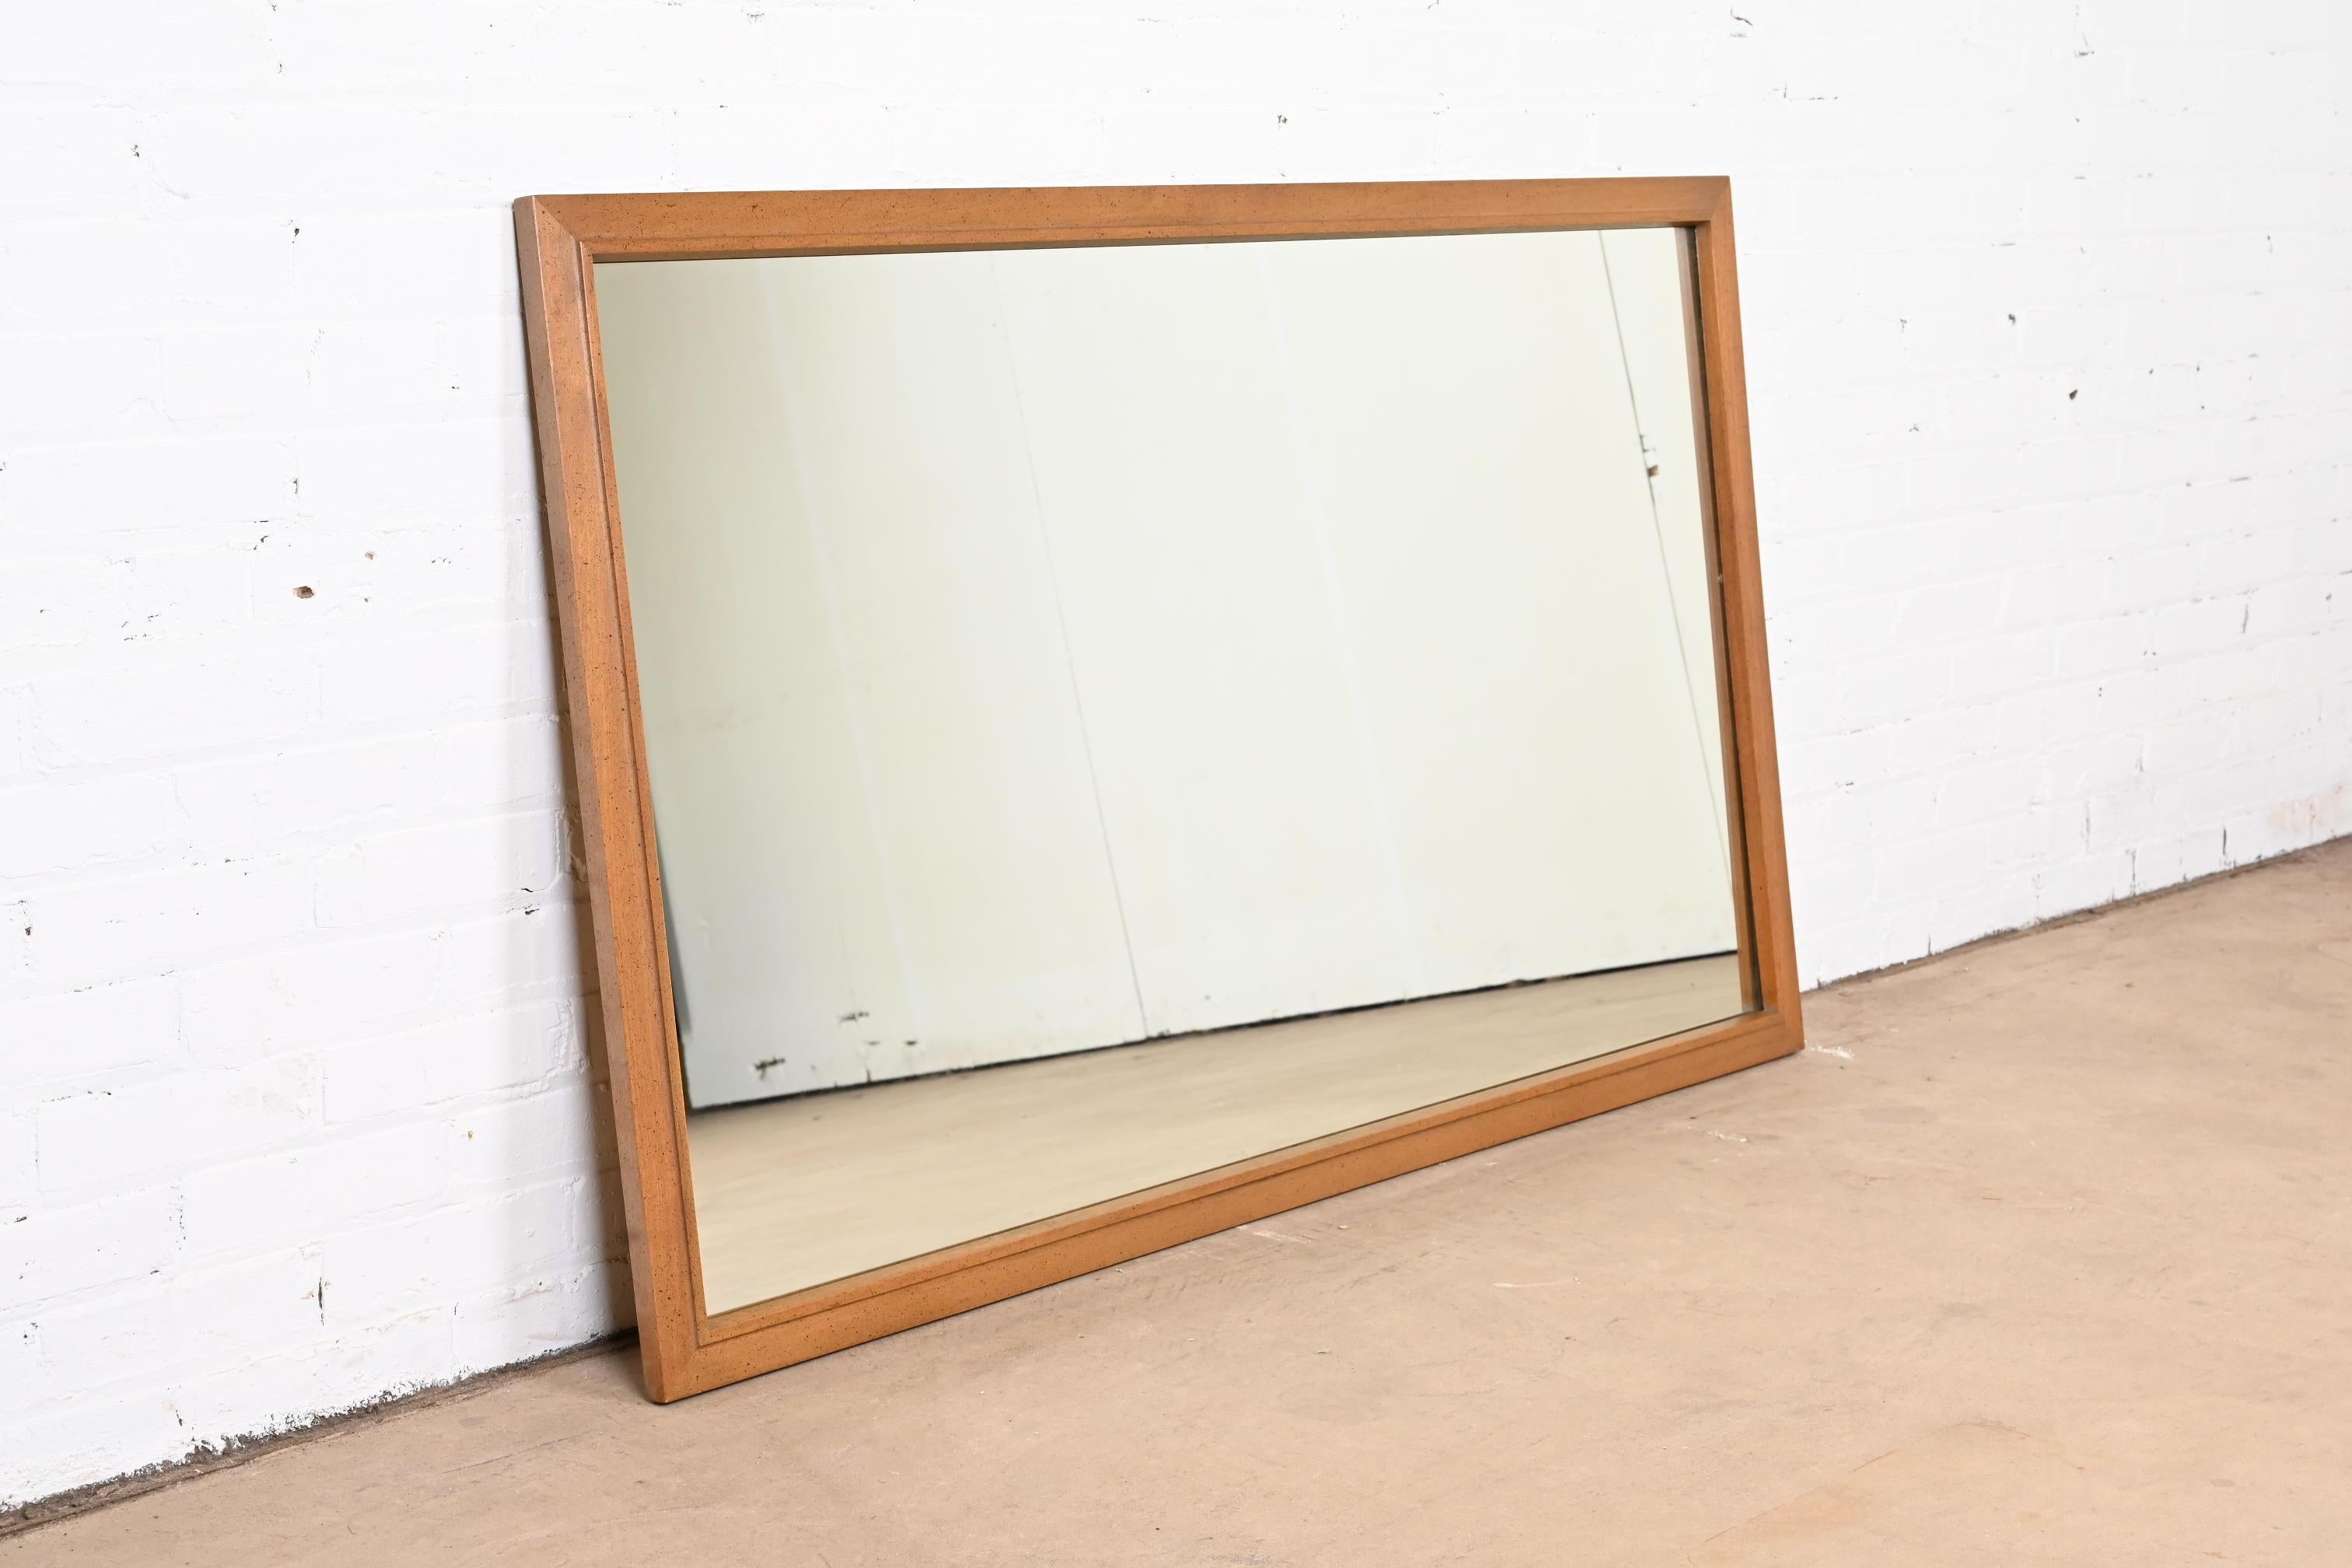 A gorgeous Mid-Century Modern large walnut framed wall mirror

USA, Mid-20th Century

Measures: 54.75